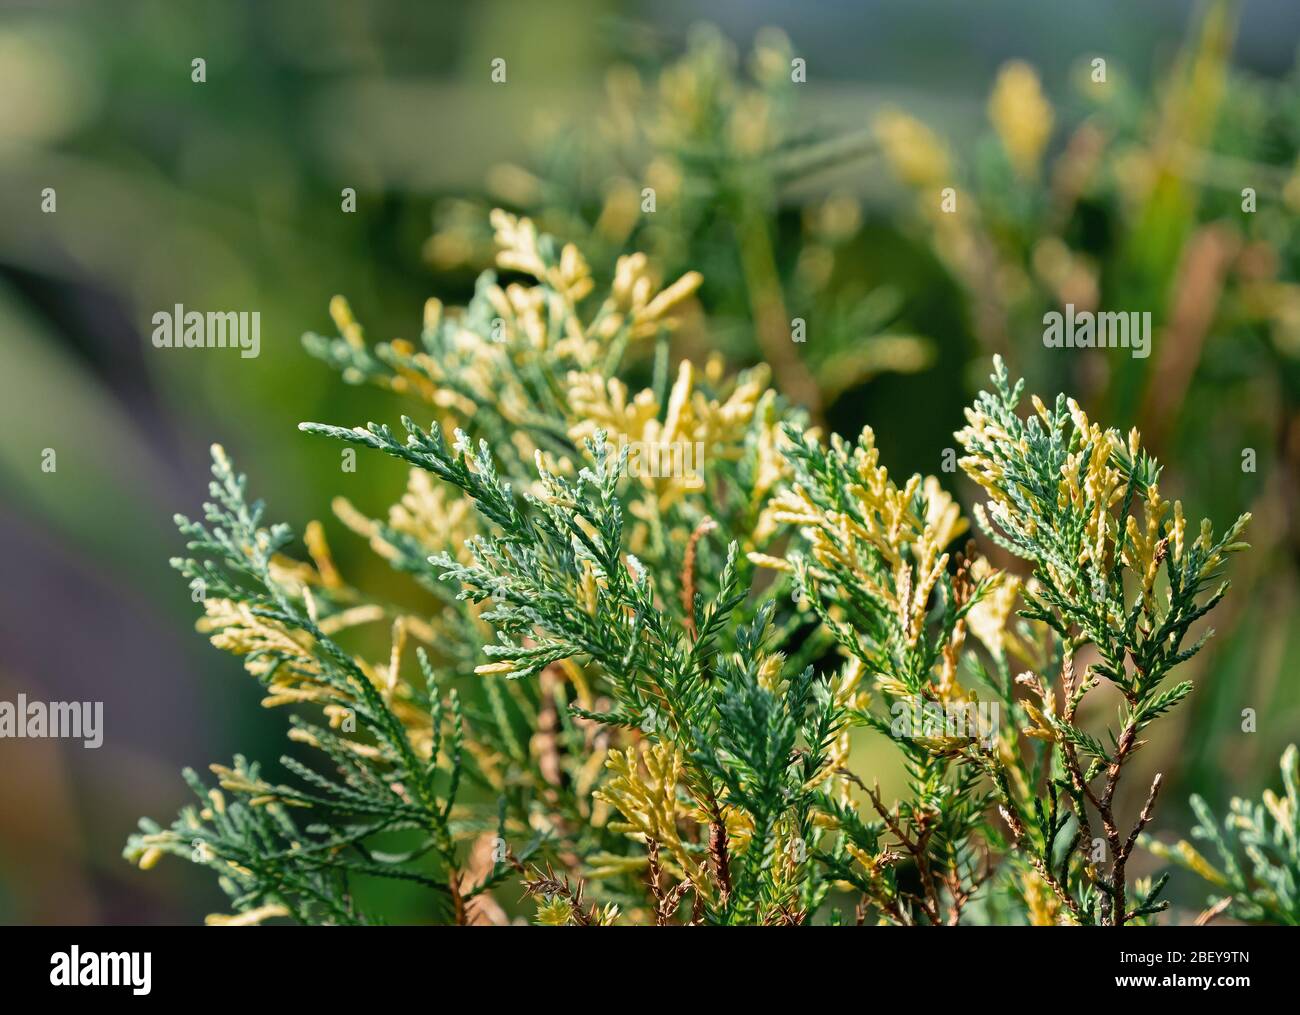 Closeup Juniperus Chinensis or Chinese Juniper Isolated on Nature Background Stock Photo